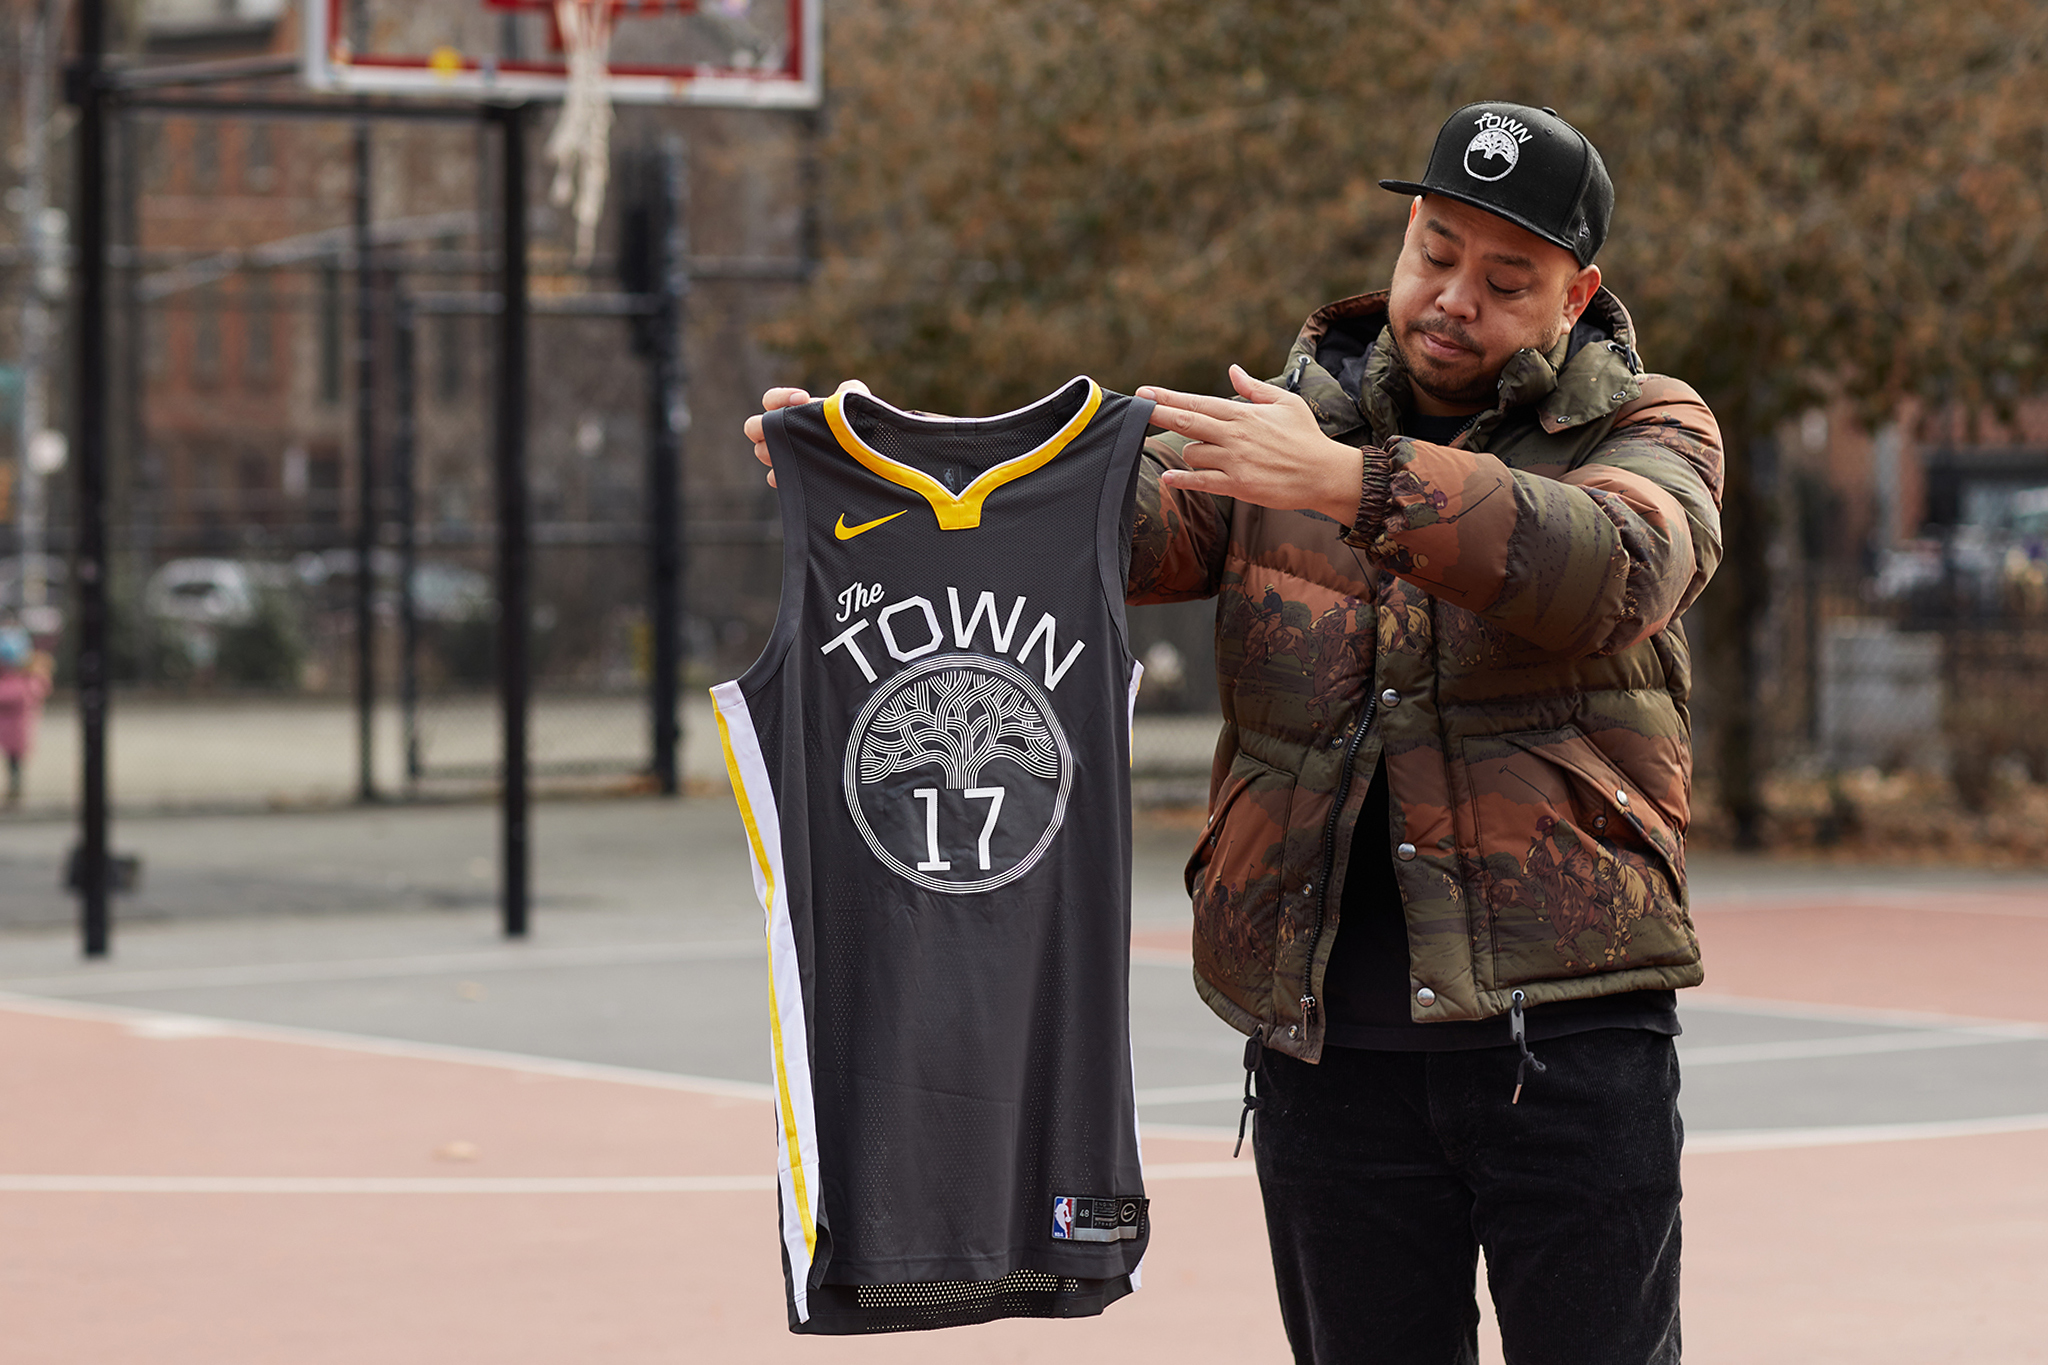 He Designed Warriors The Town Apparel He Says Oakland Forever Is An Insincere Guilt Jersey